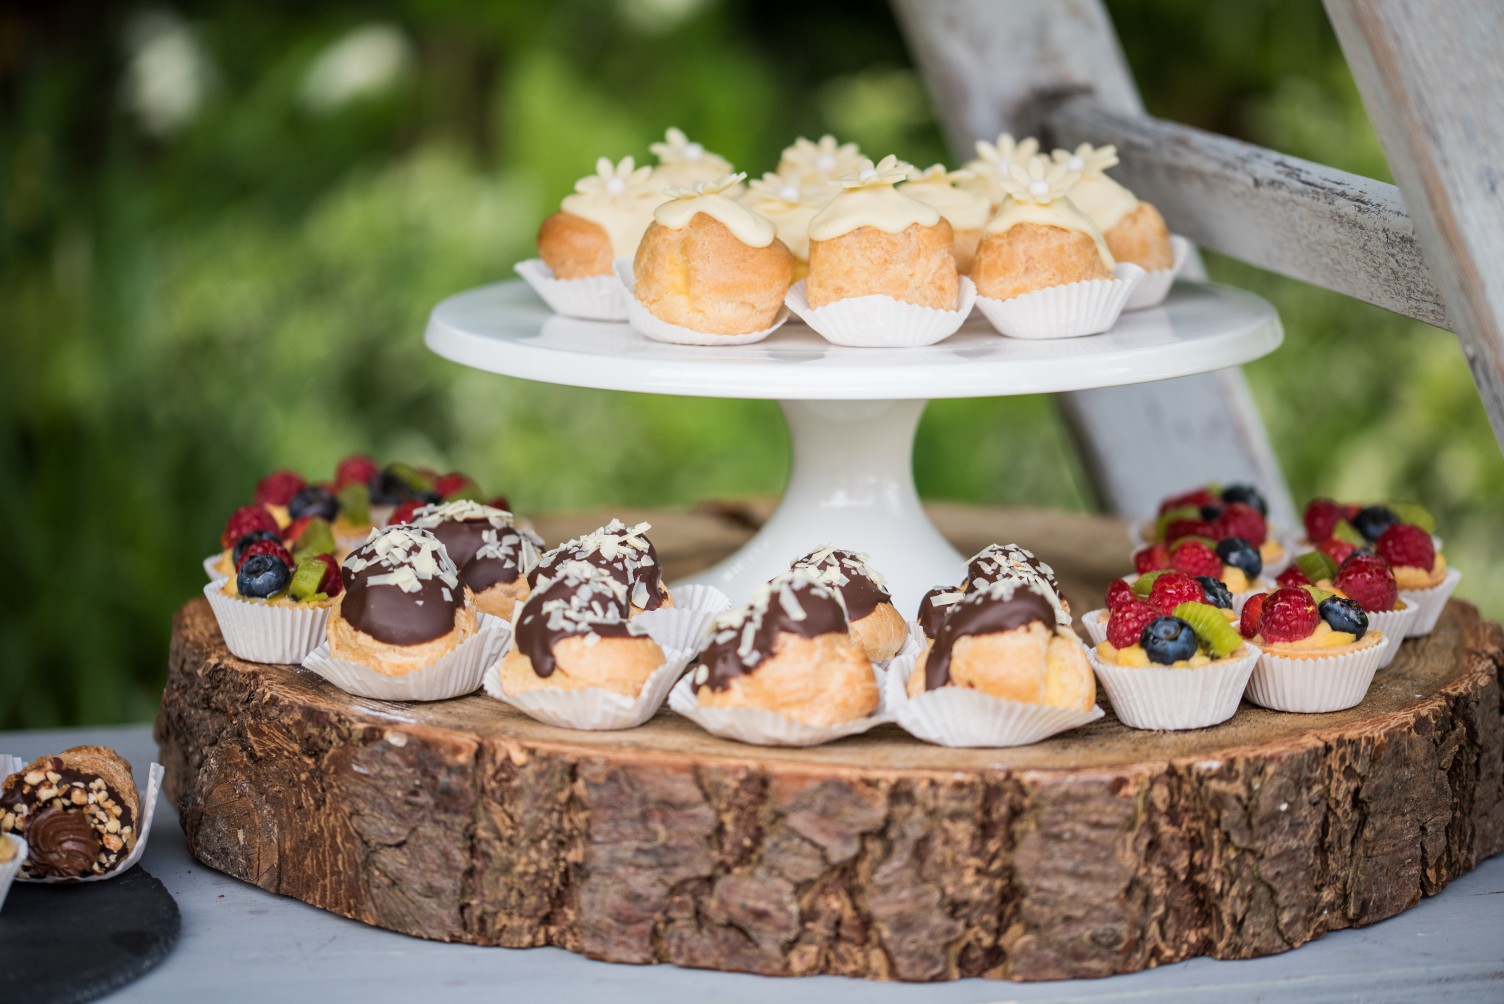 How To Rock A Wedding Dessert Table The Italian Way ⋆